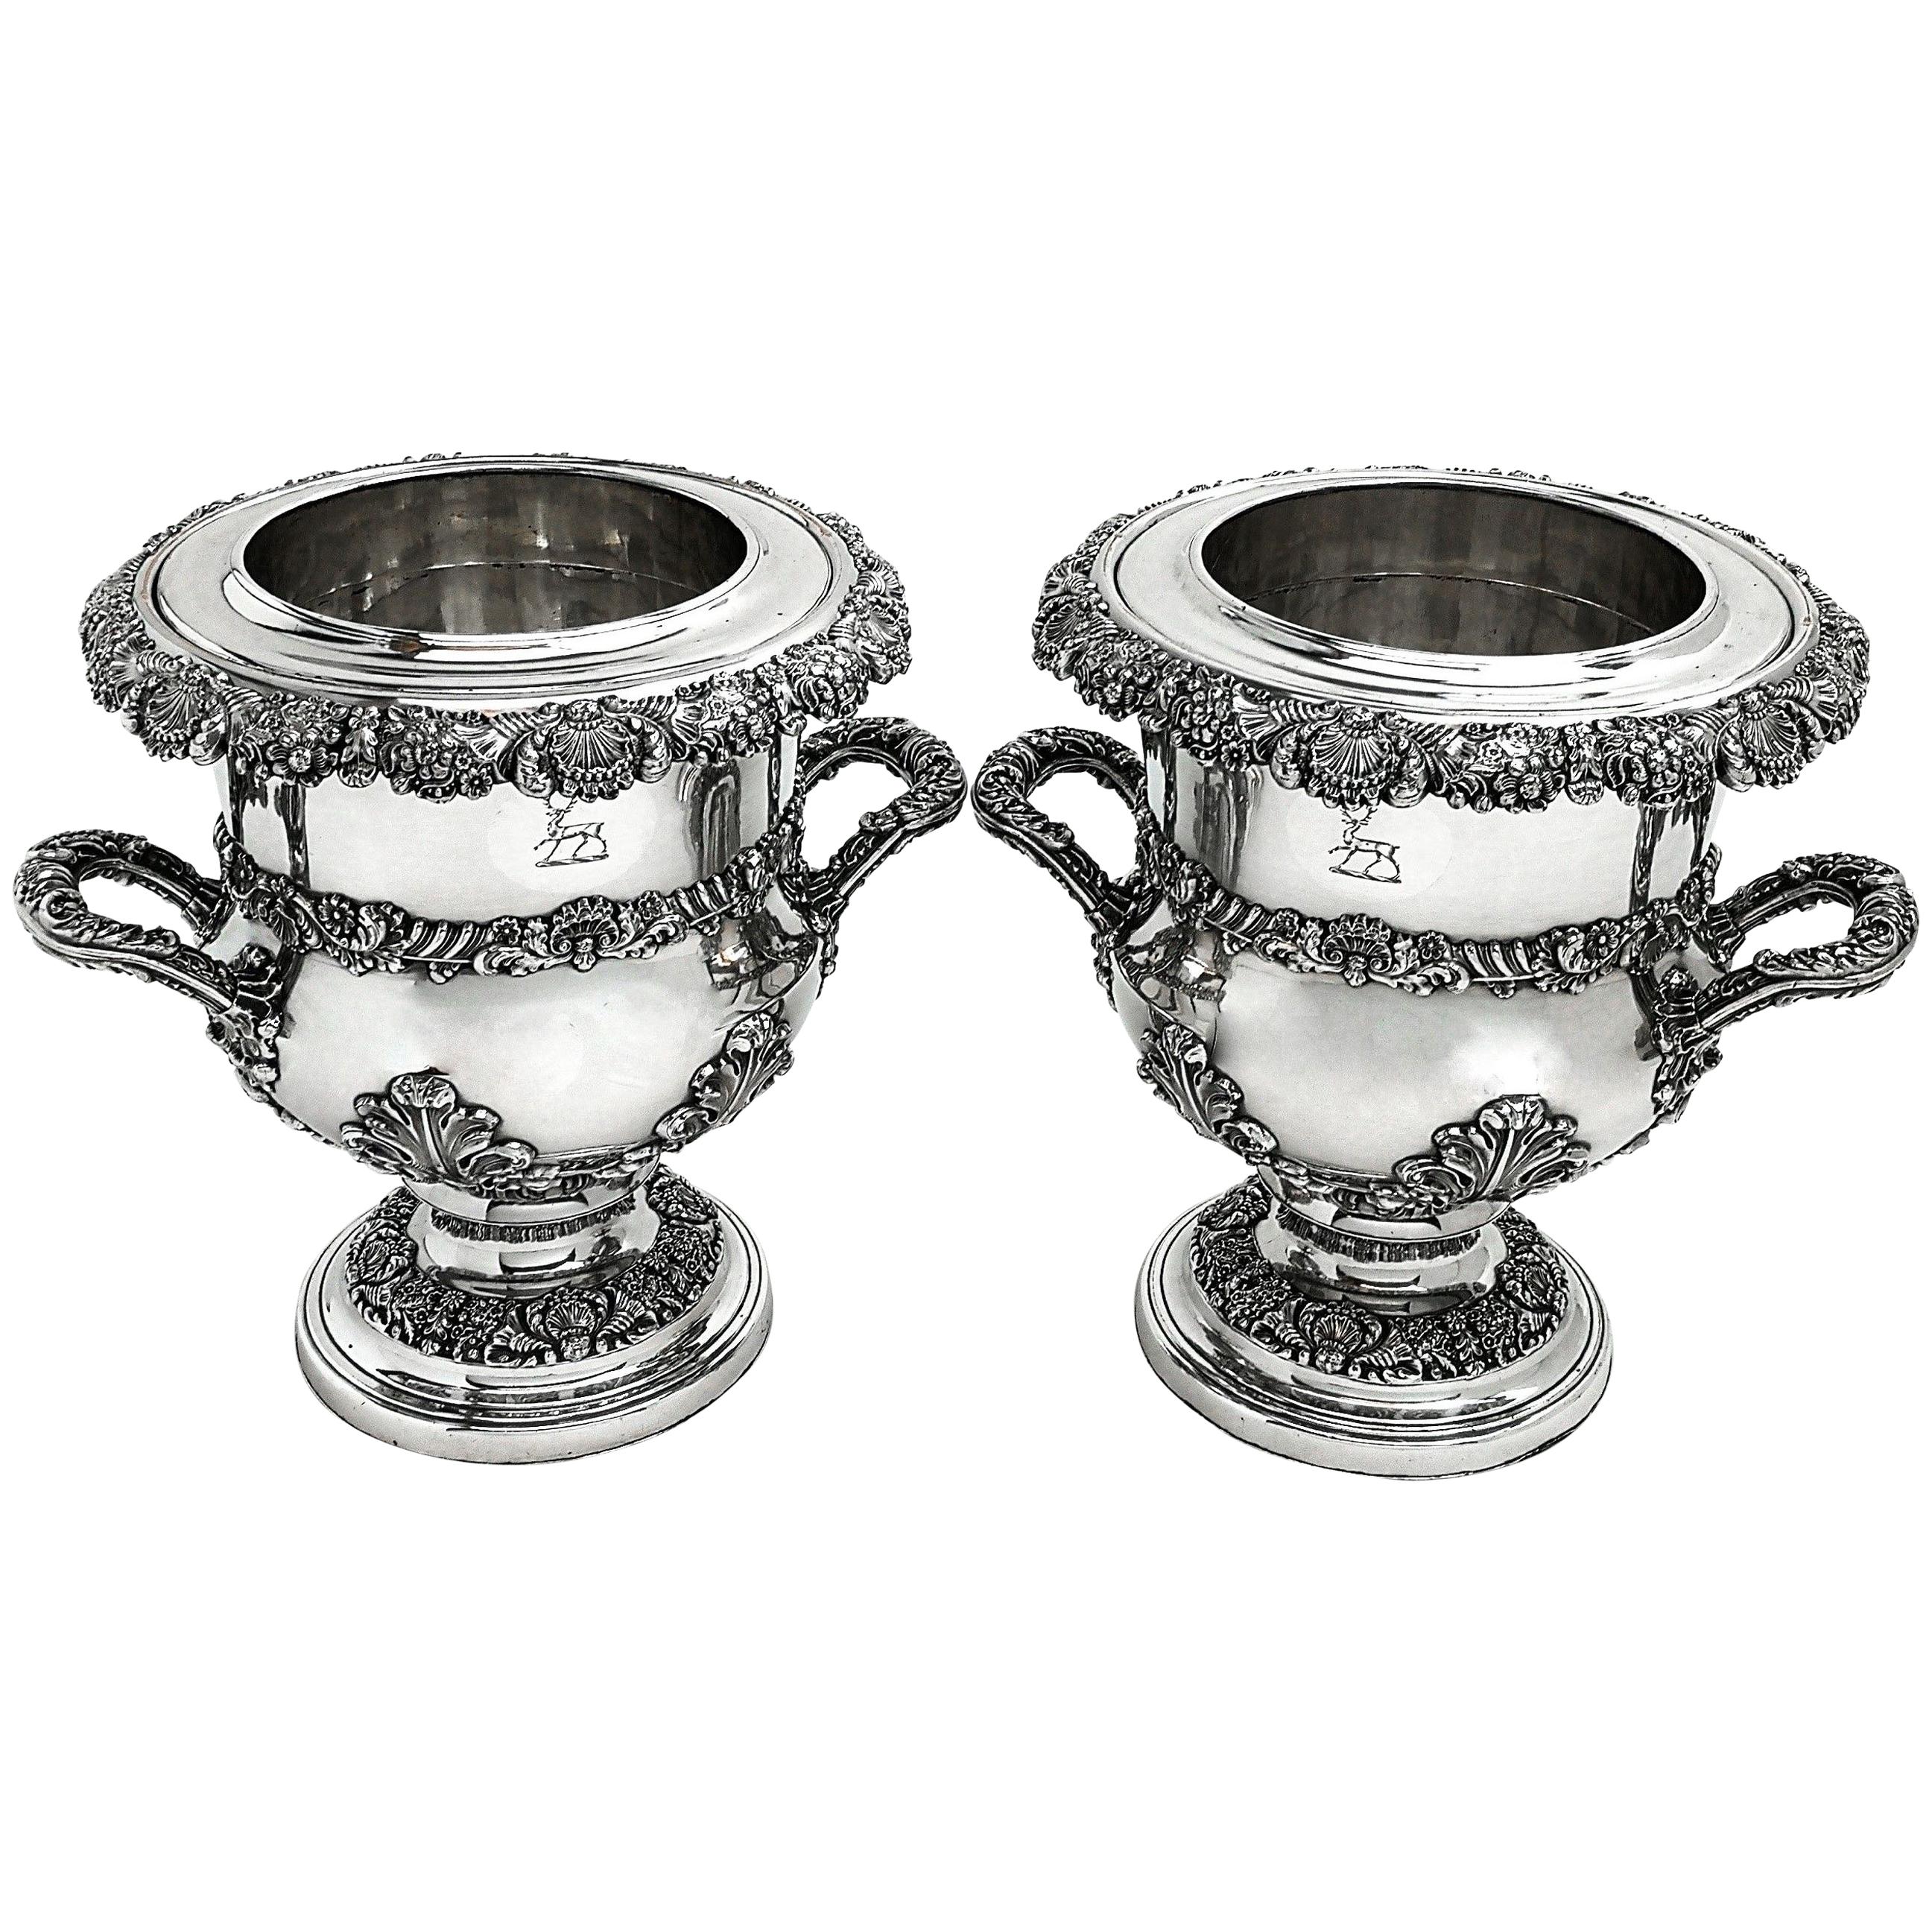 Antique Georgian Old Sheffield Plate Wine Coolers c. 1825 Silver Plate  Pair